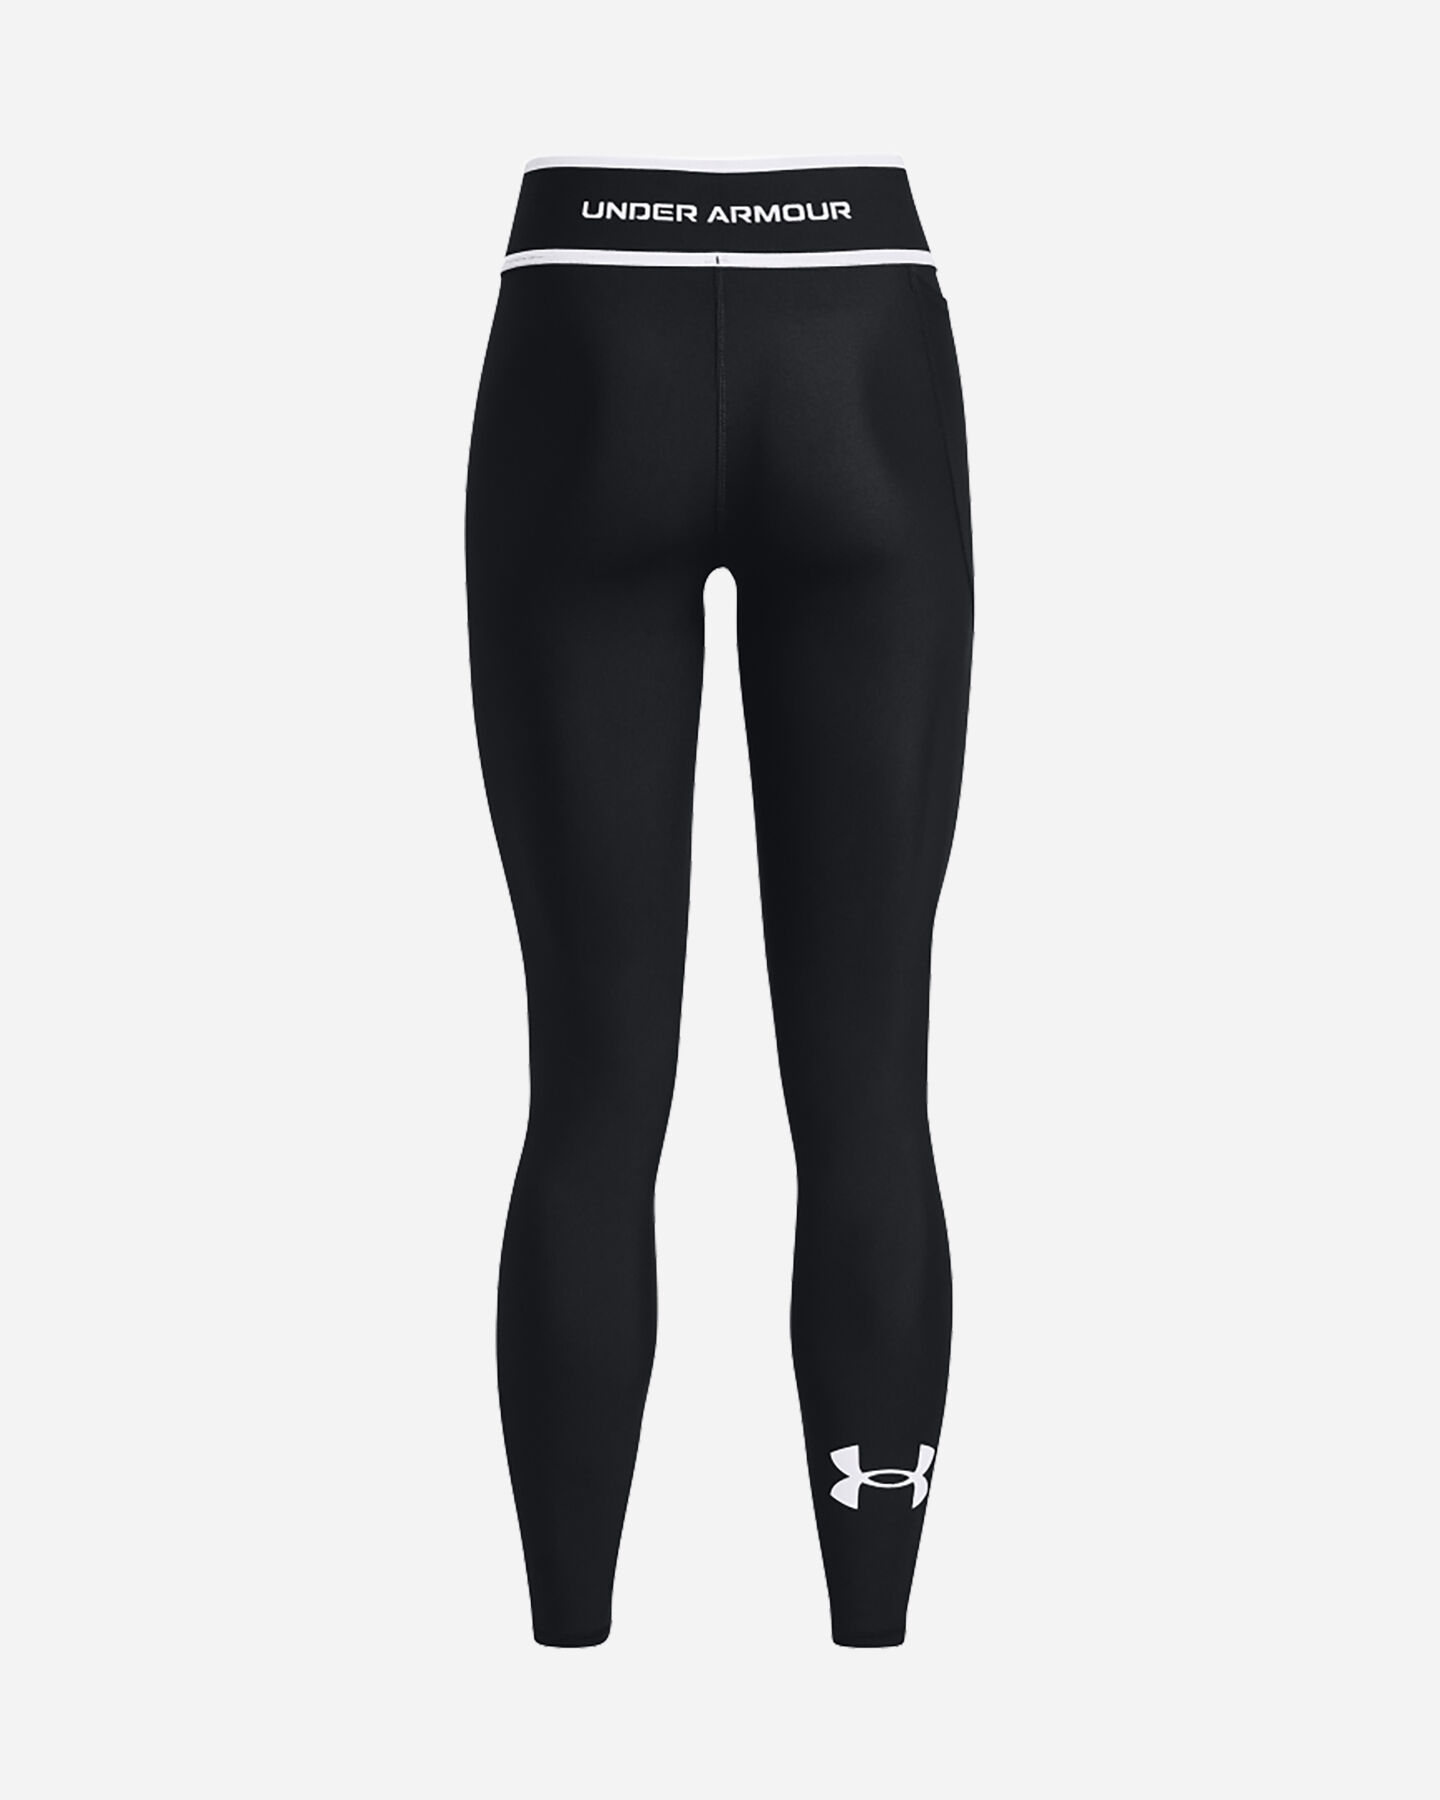  Leggings UNDER ARMOUR ARMOUR BRANDED WB W S5390283|0001|XS scatto 1